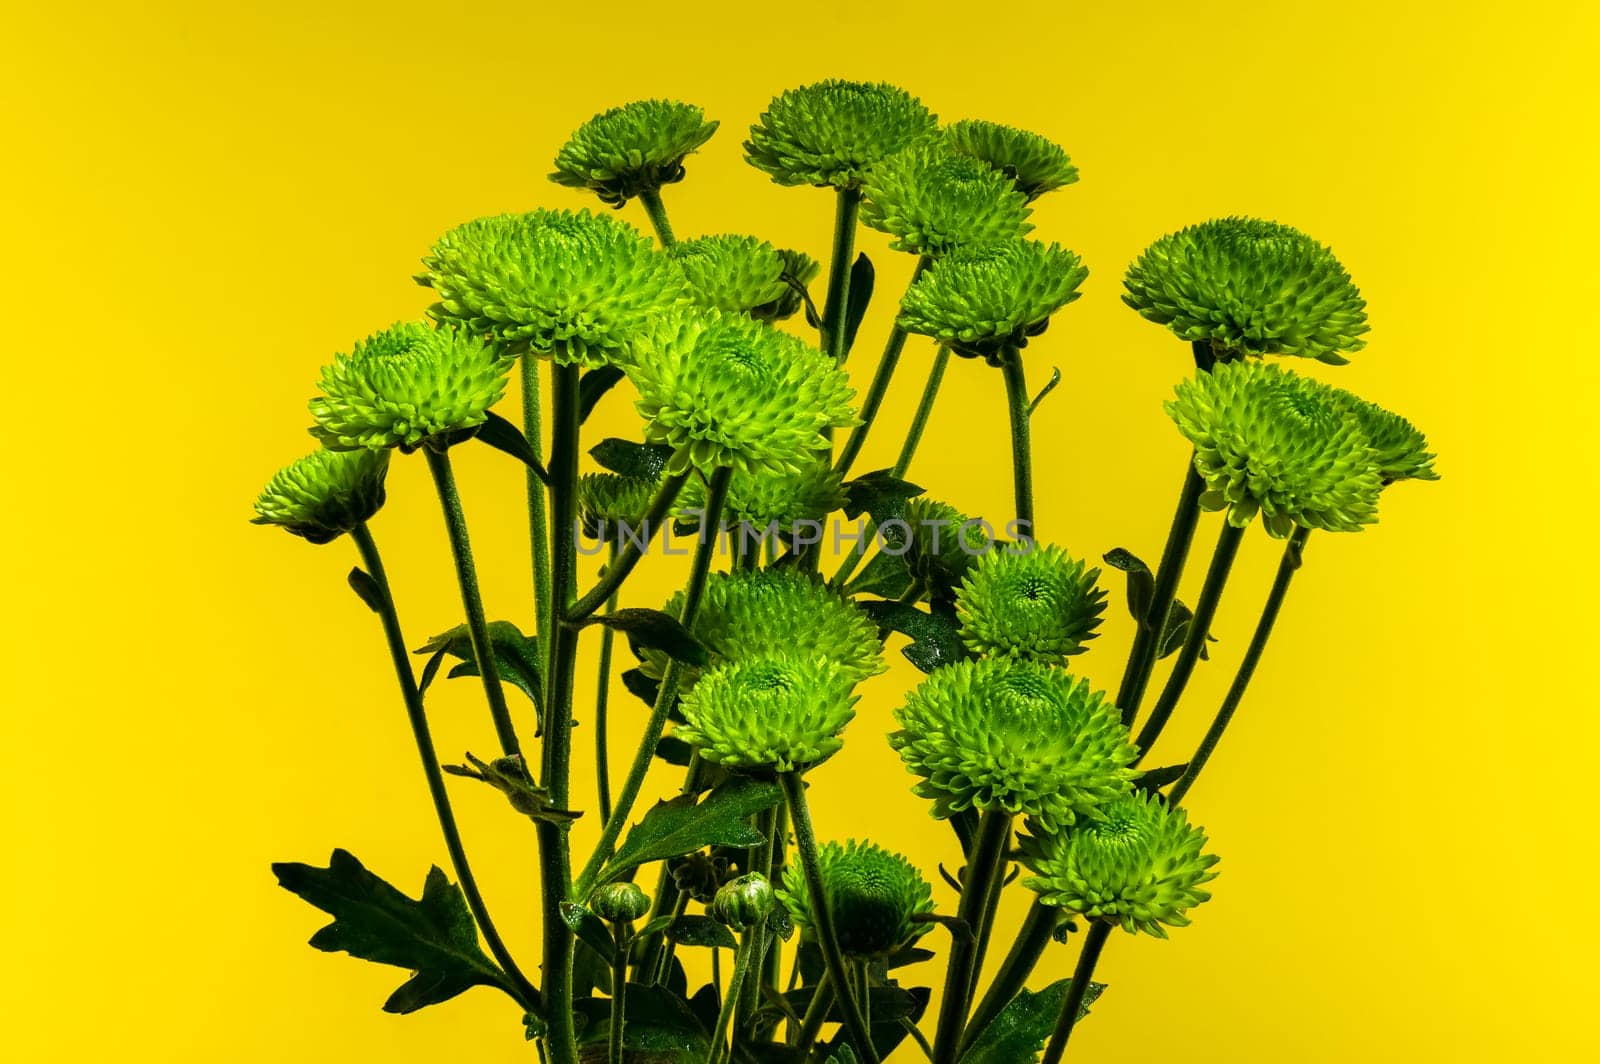 Green chrysanthemum flowers on a yellow background. Flower heads close-up